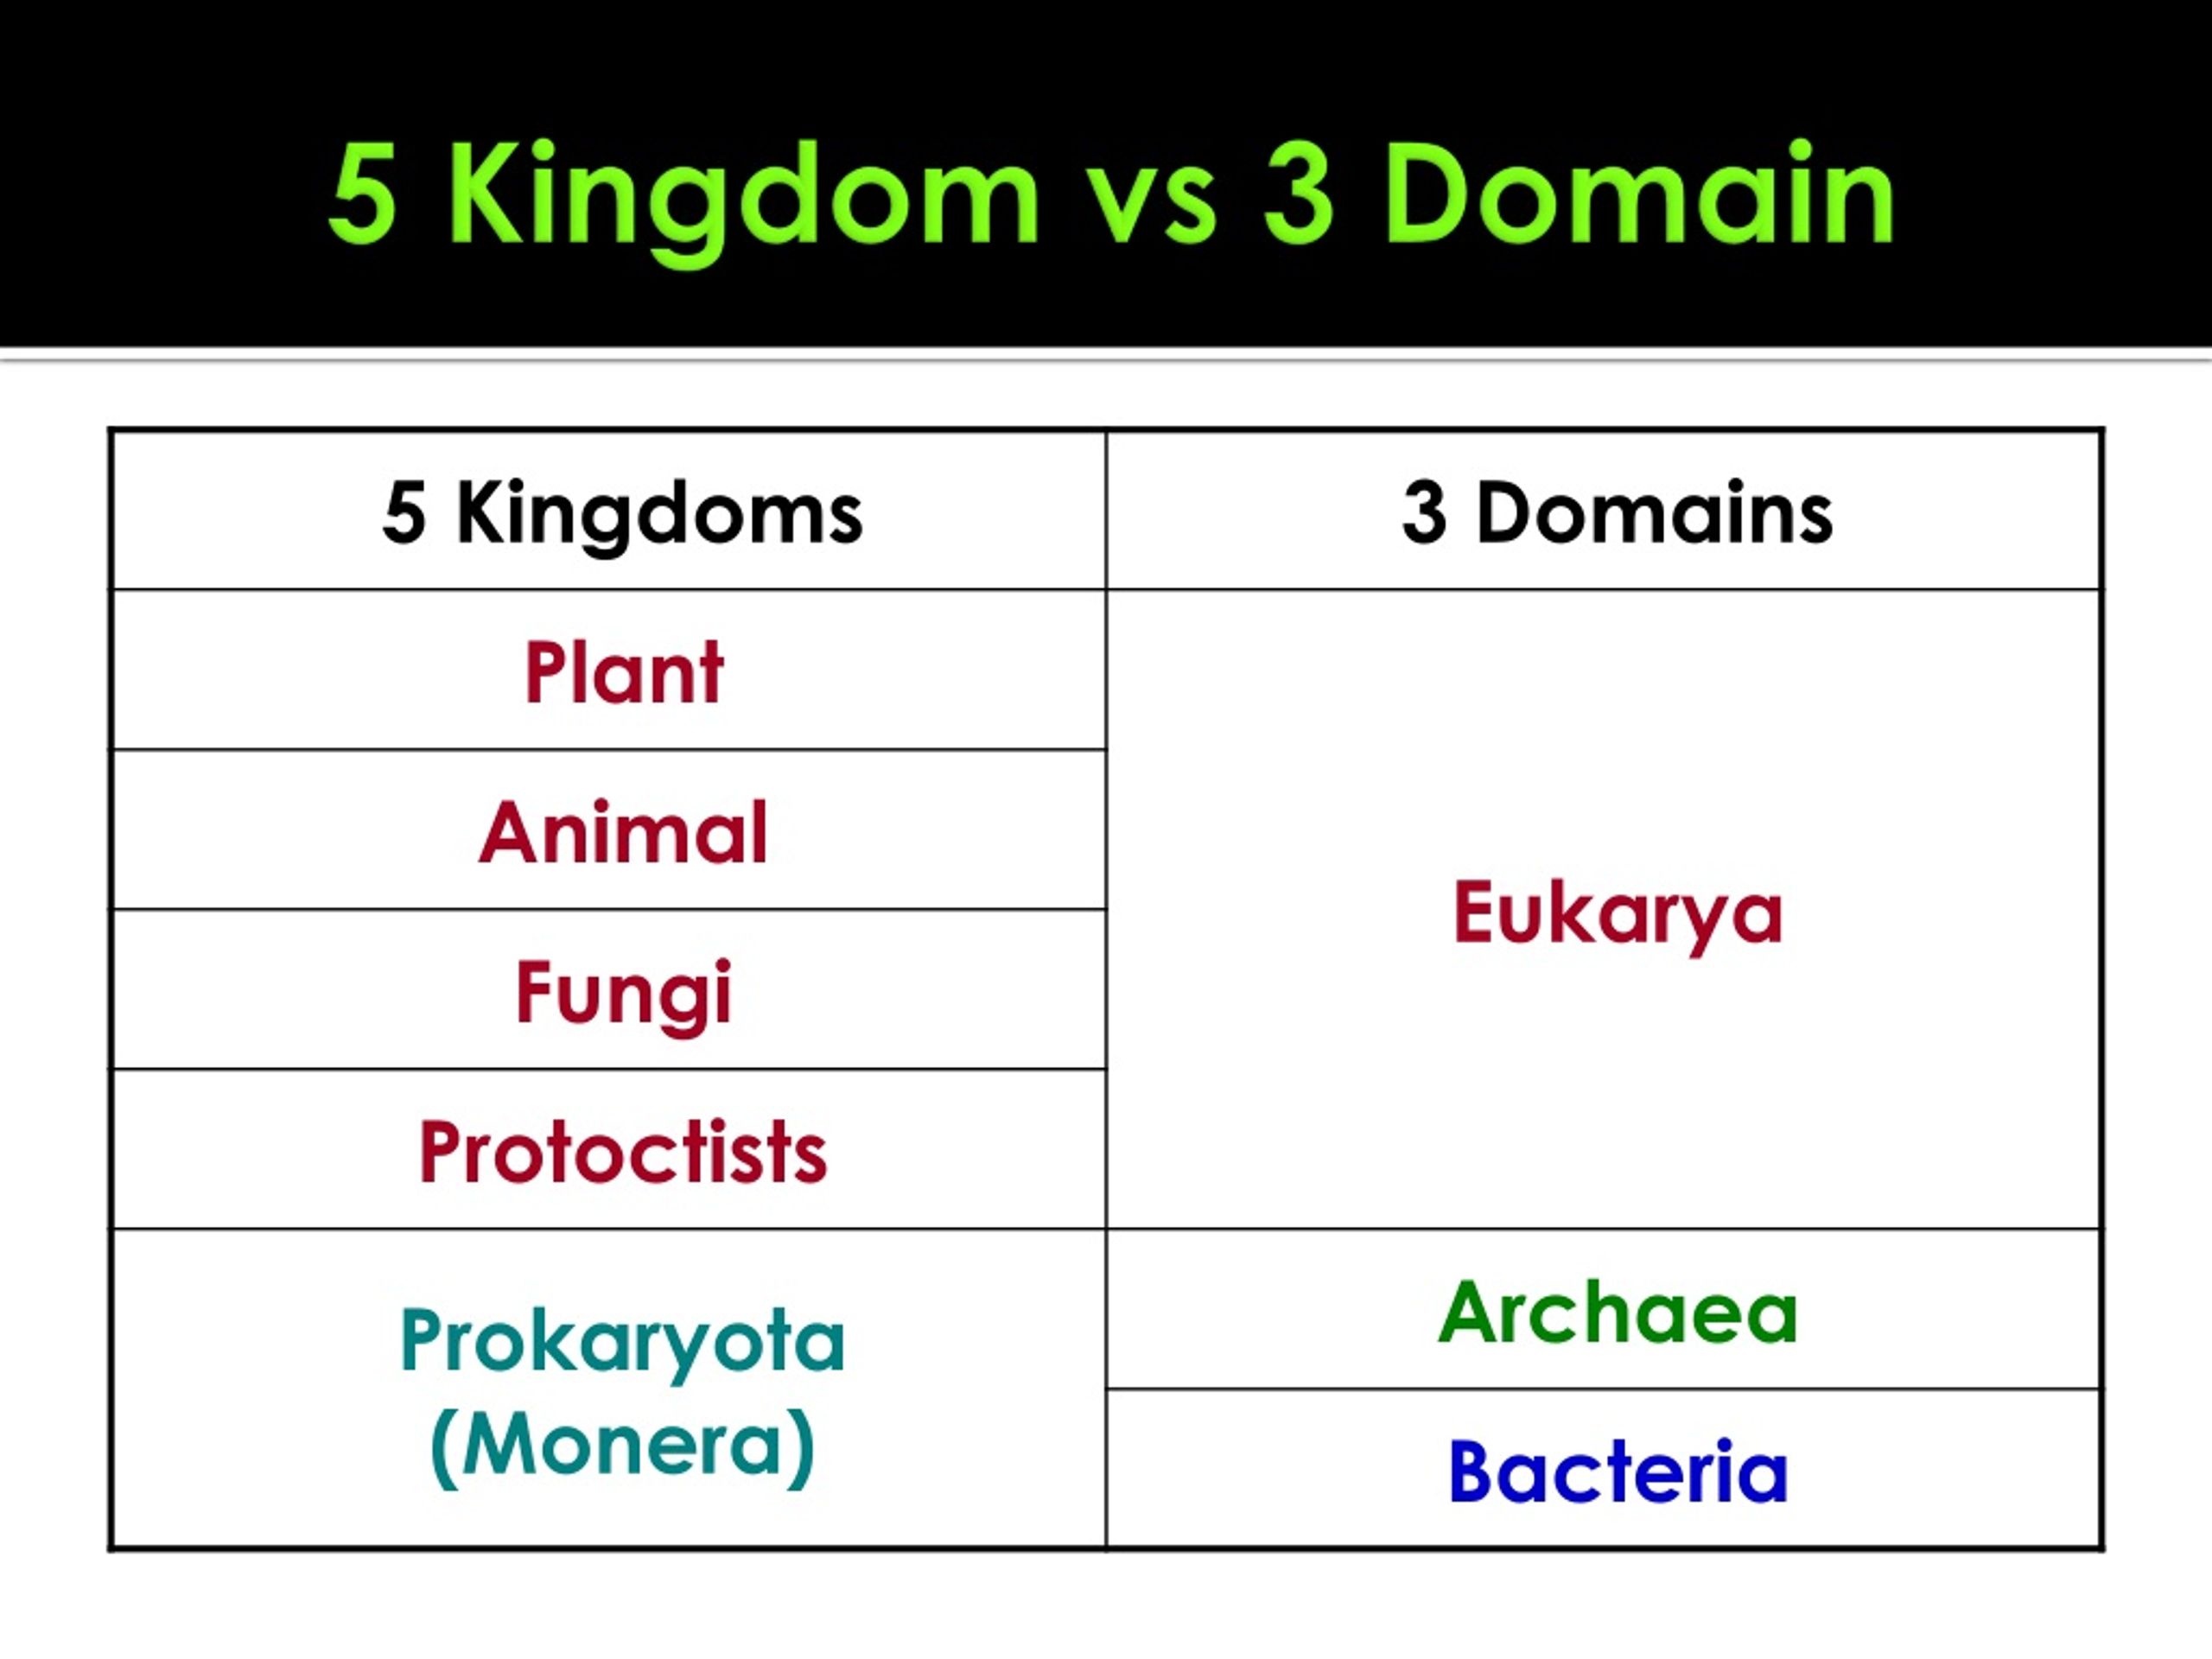 which table correctly identifies the three kingdoms